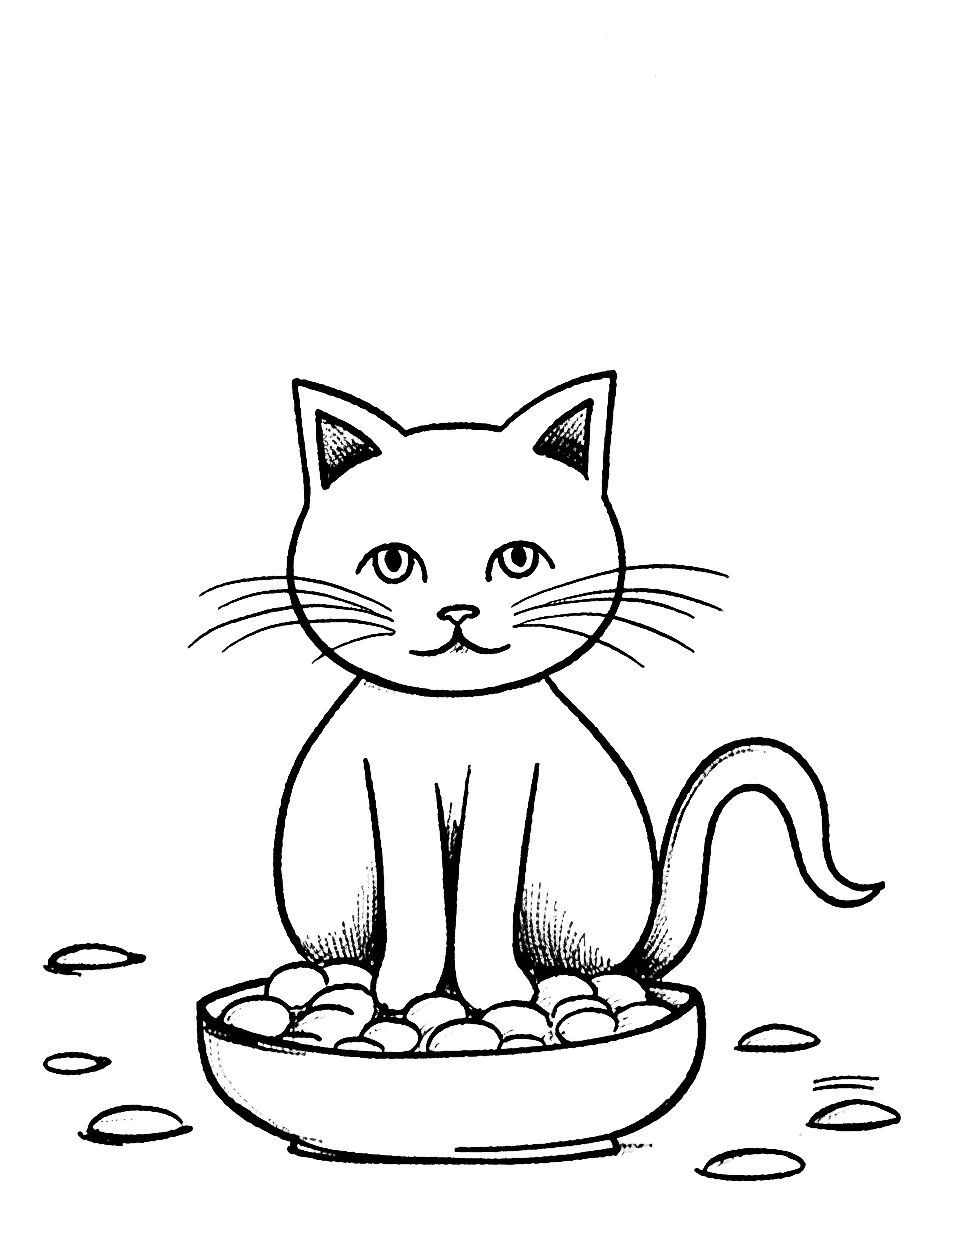 Cat Enjoying a Fish Meal Coloring Page - A cat joyously feasting on a plate full of fish.